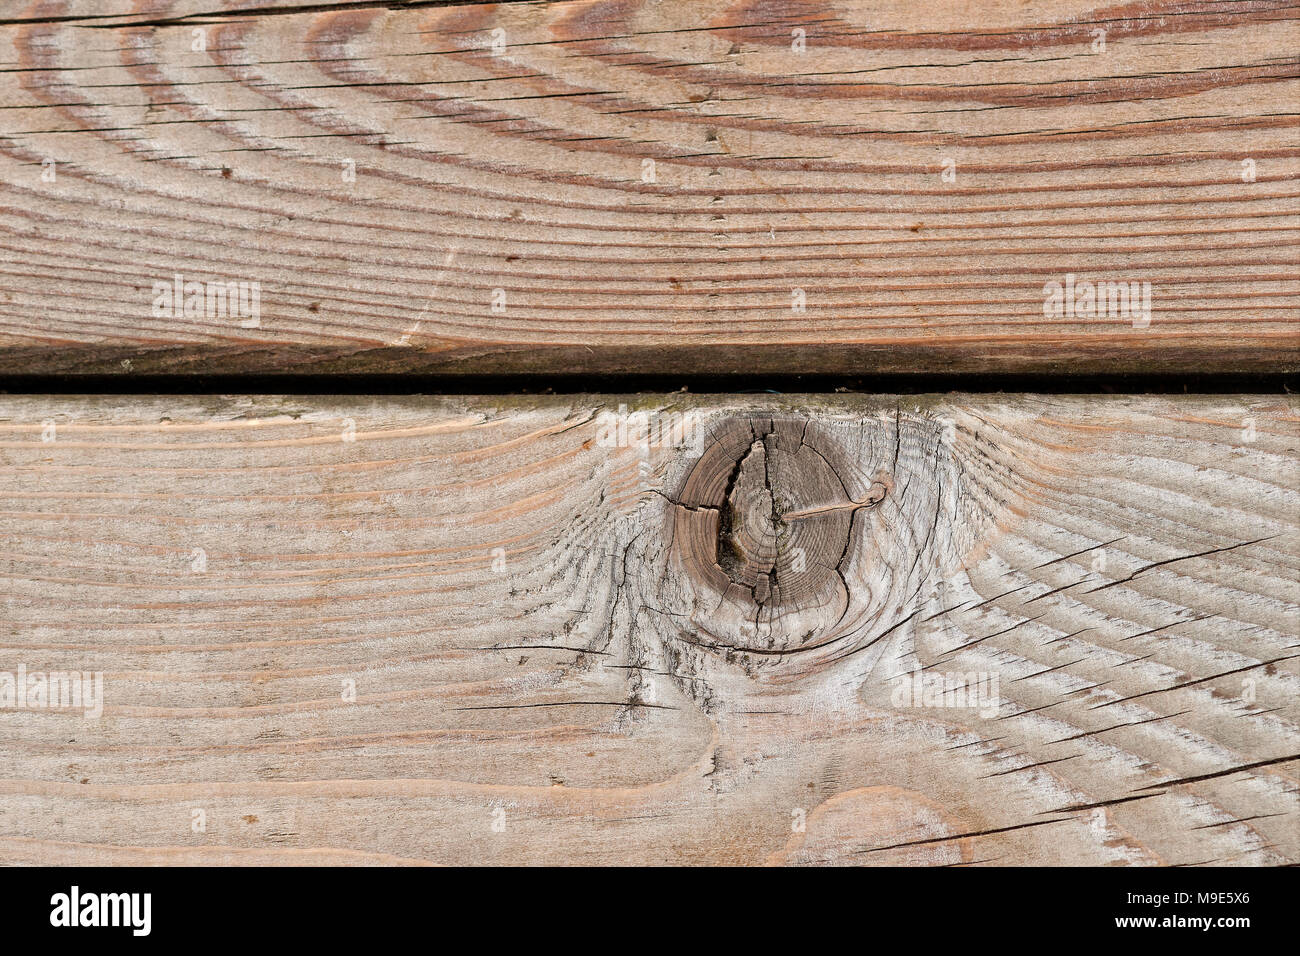 Wooden plank or board with a large knot or snag. Grey, brown, yellowish colors. Closeup view Stock Photo